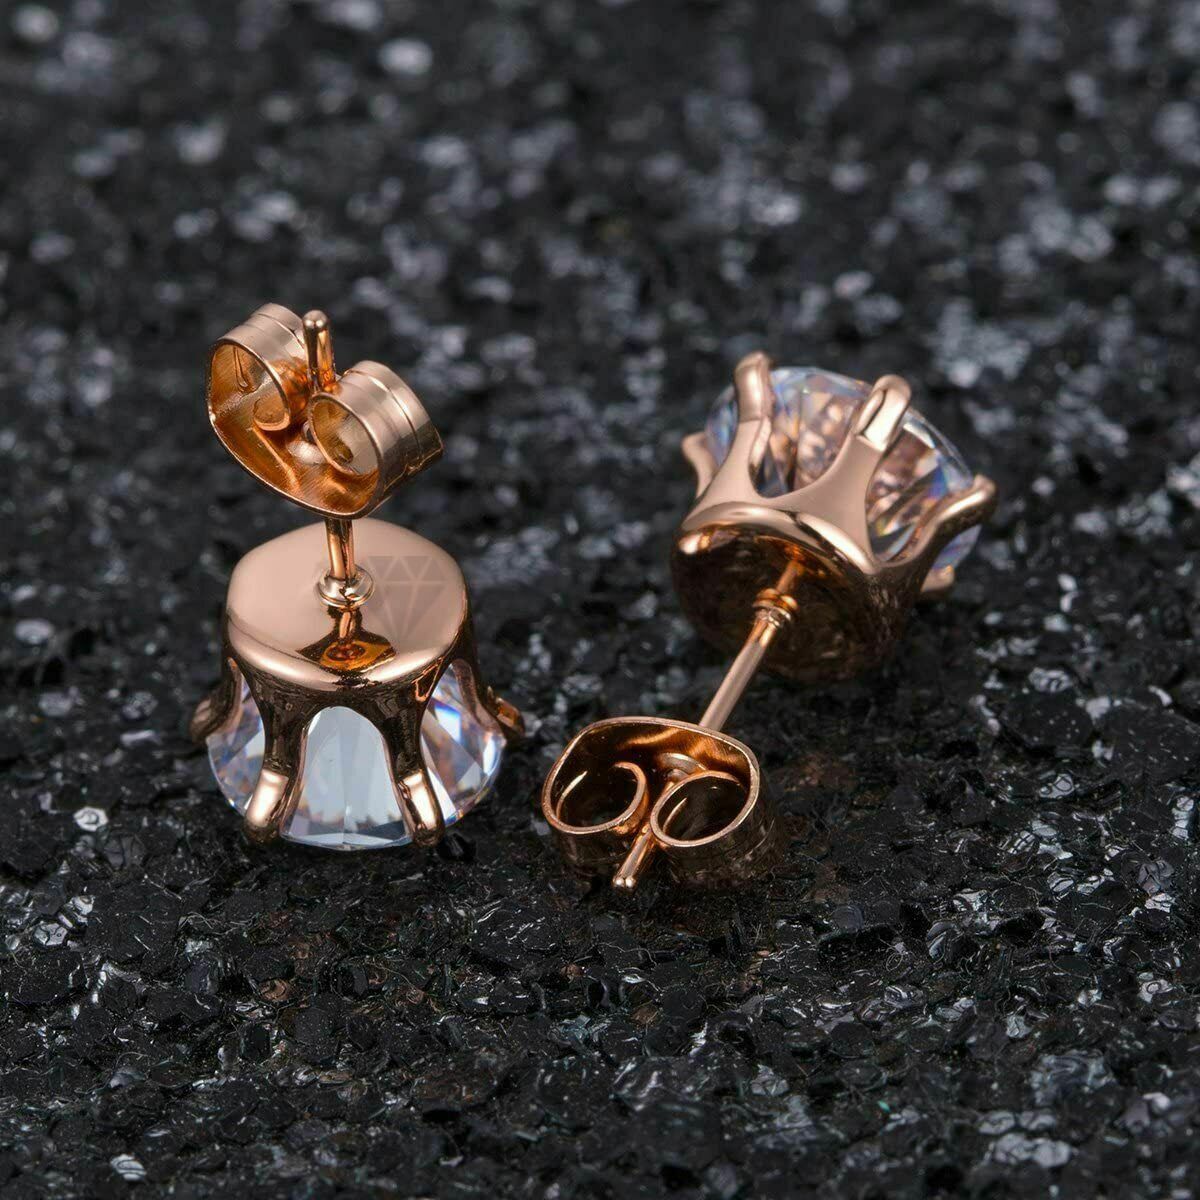 7MM Women Kids Surgical Steel Rose Gold Plated CZ Non-Allergenic Stud Earrings